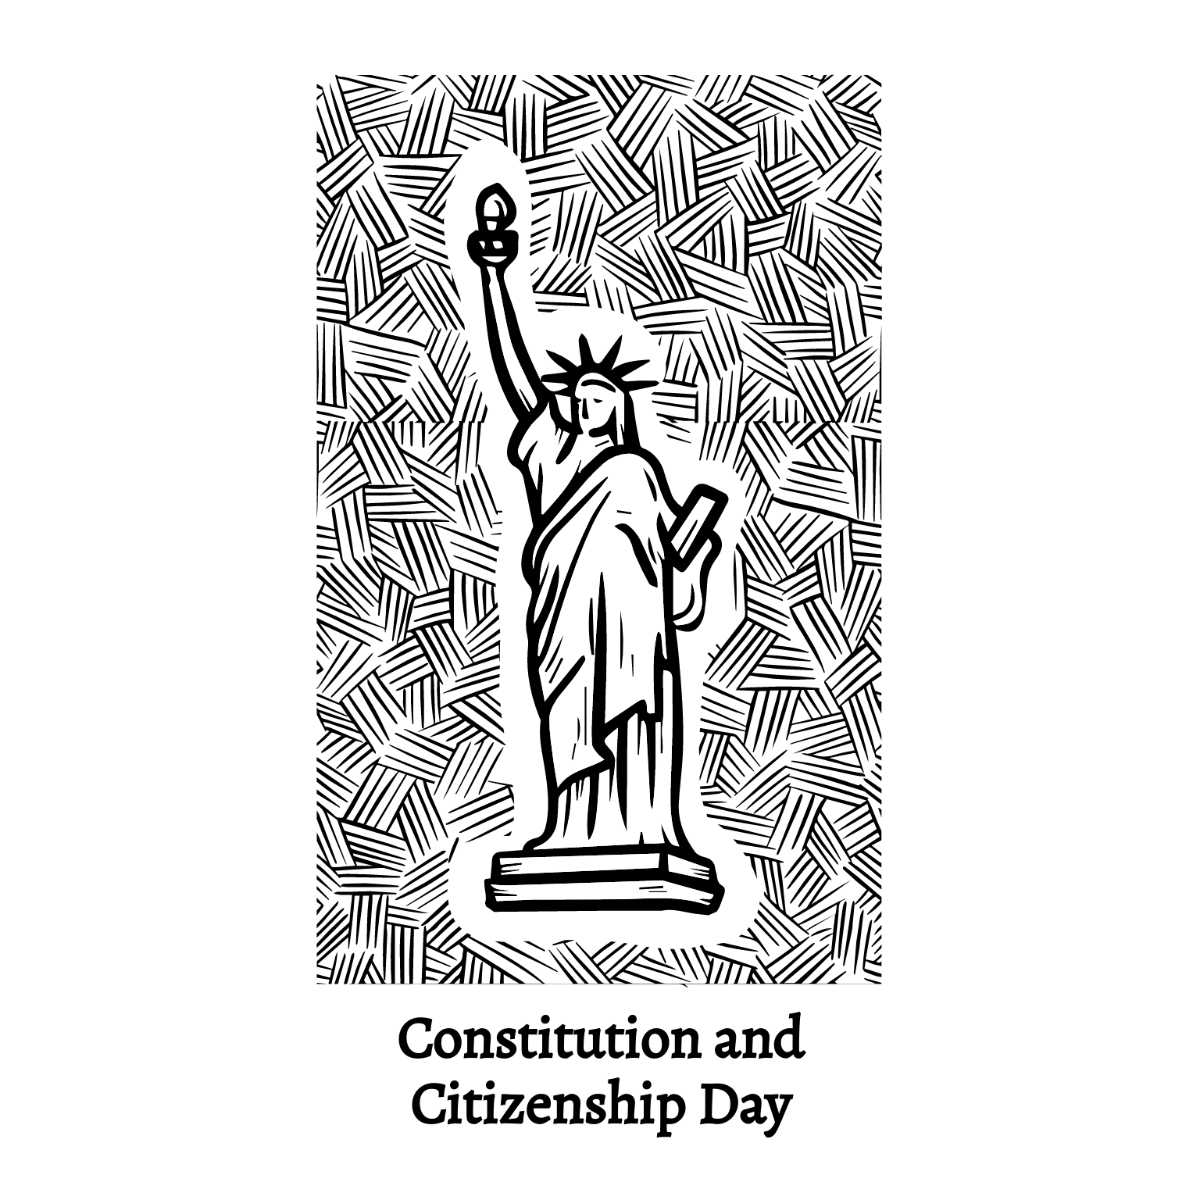 Constitution and Citizenship Day Sketch Vector